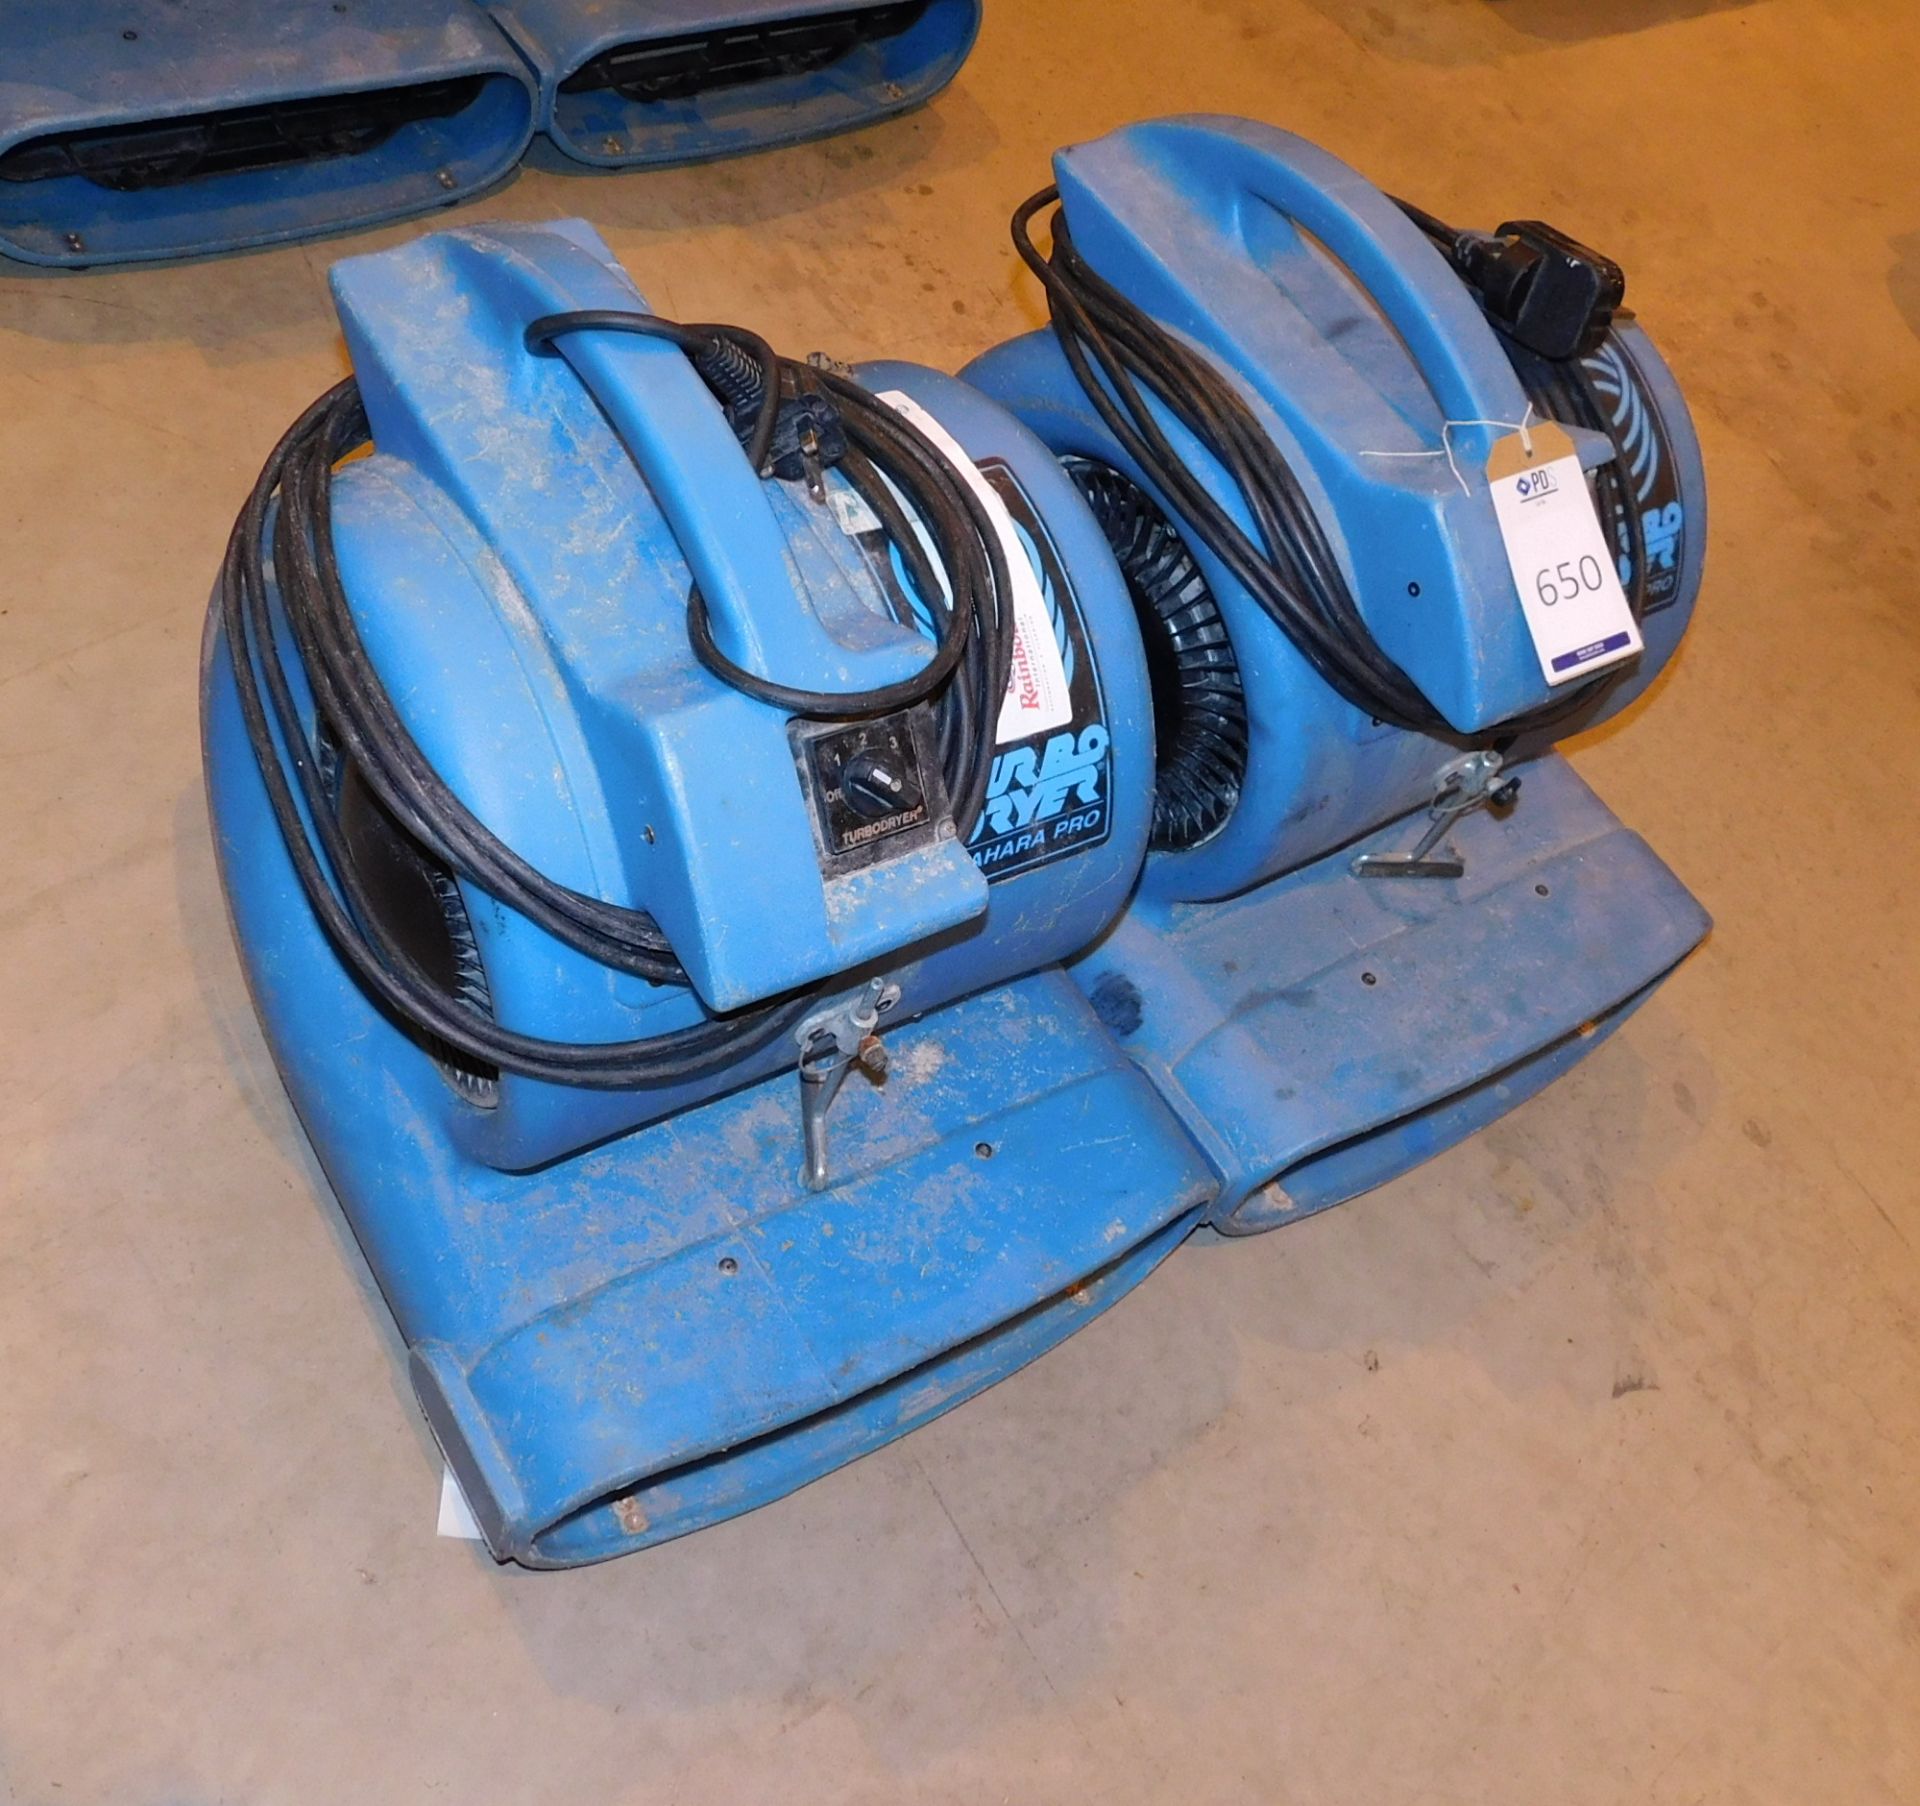 2 Drieaz Sahara Pro Turbodryer Air Movers (Located Milton Keynes – See General Notes for Viewing & - Image 2 of 2